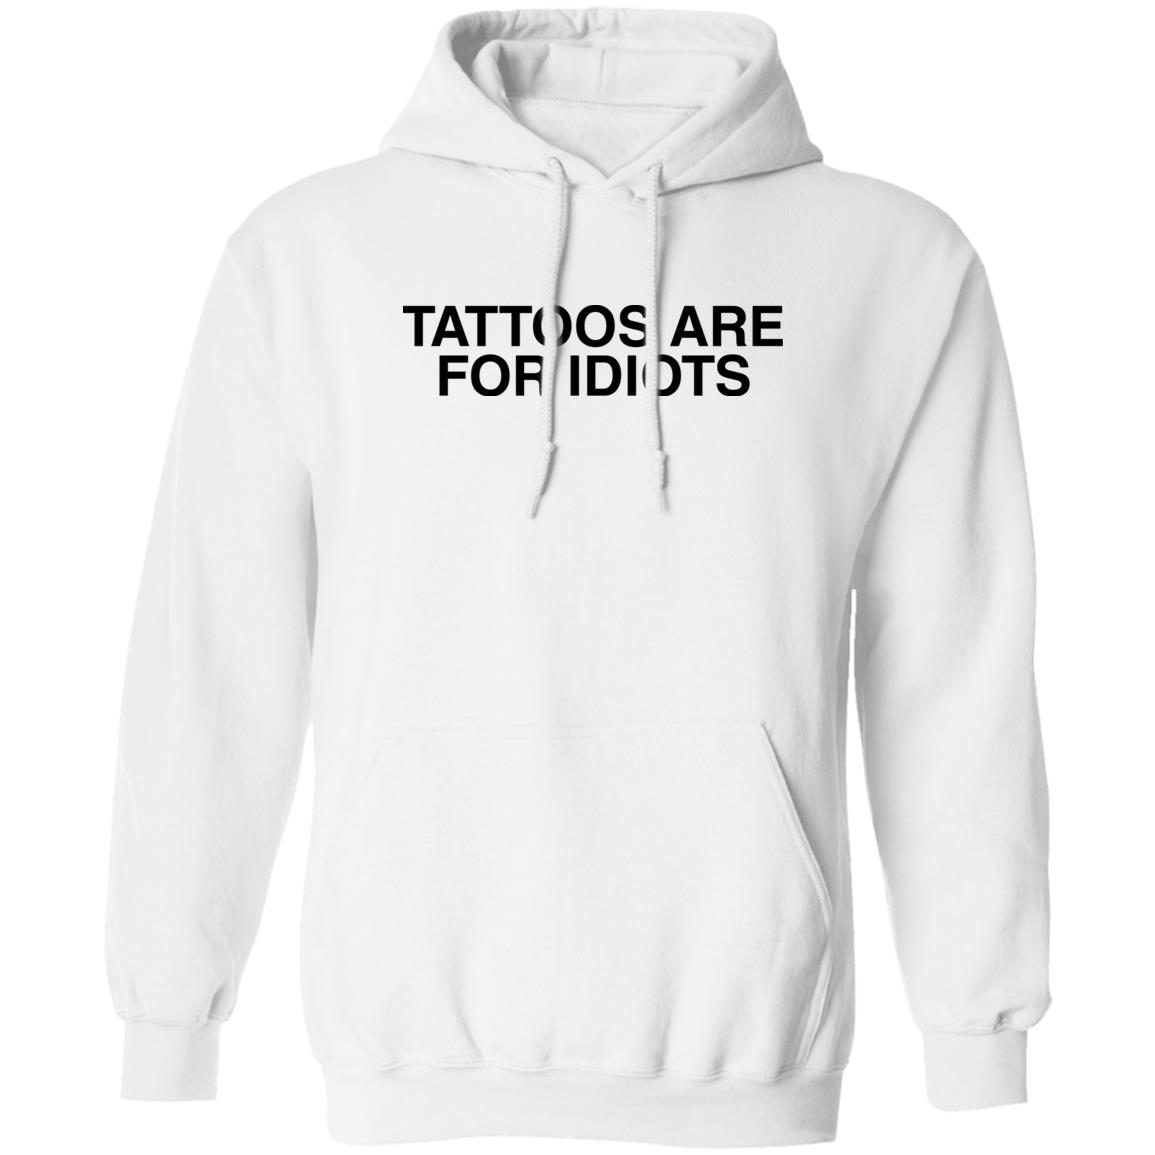 Tattoos Are For Idiots Shirt 1